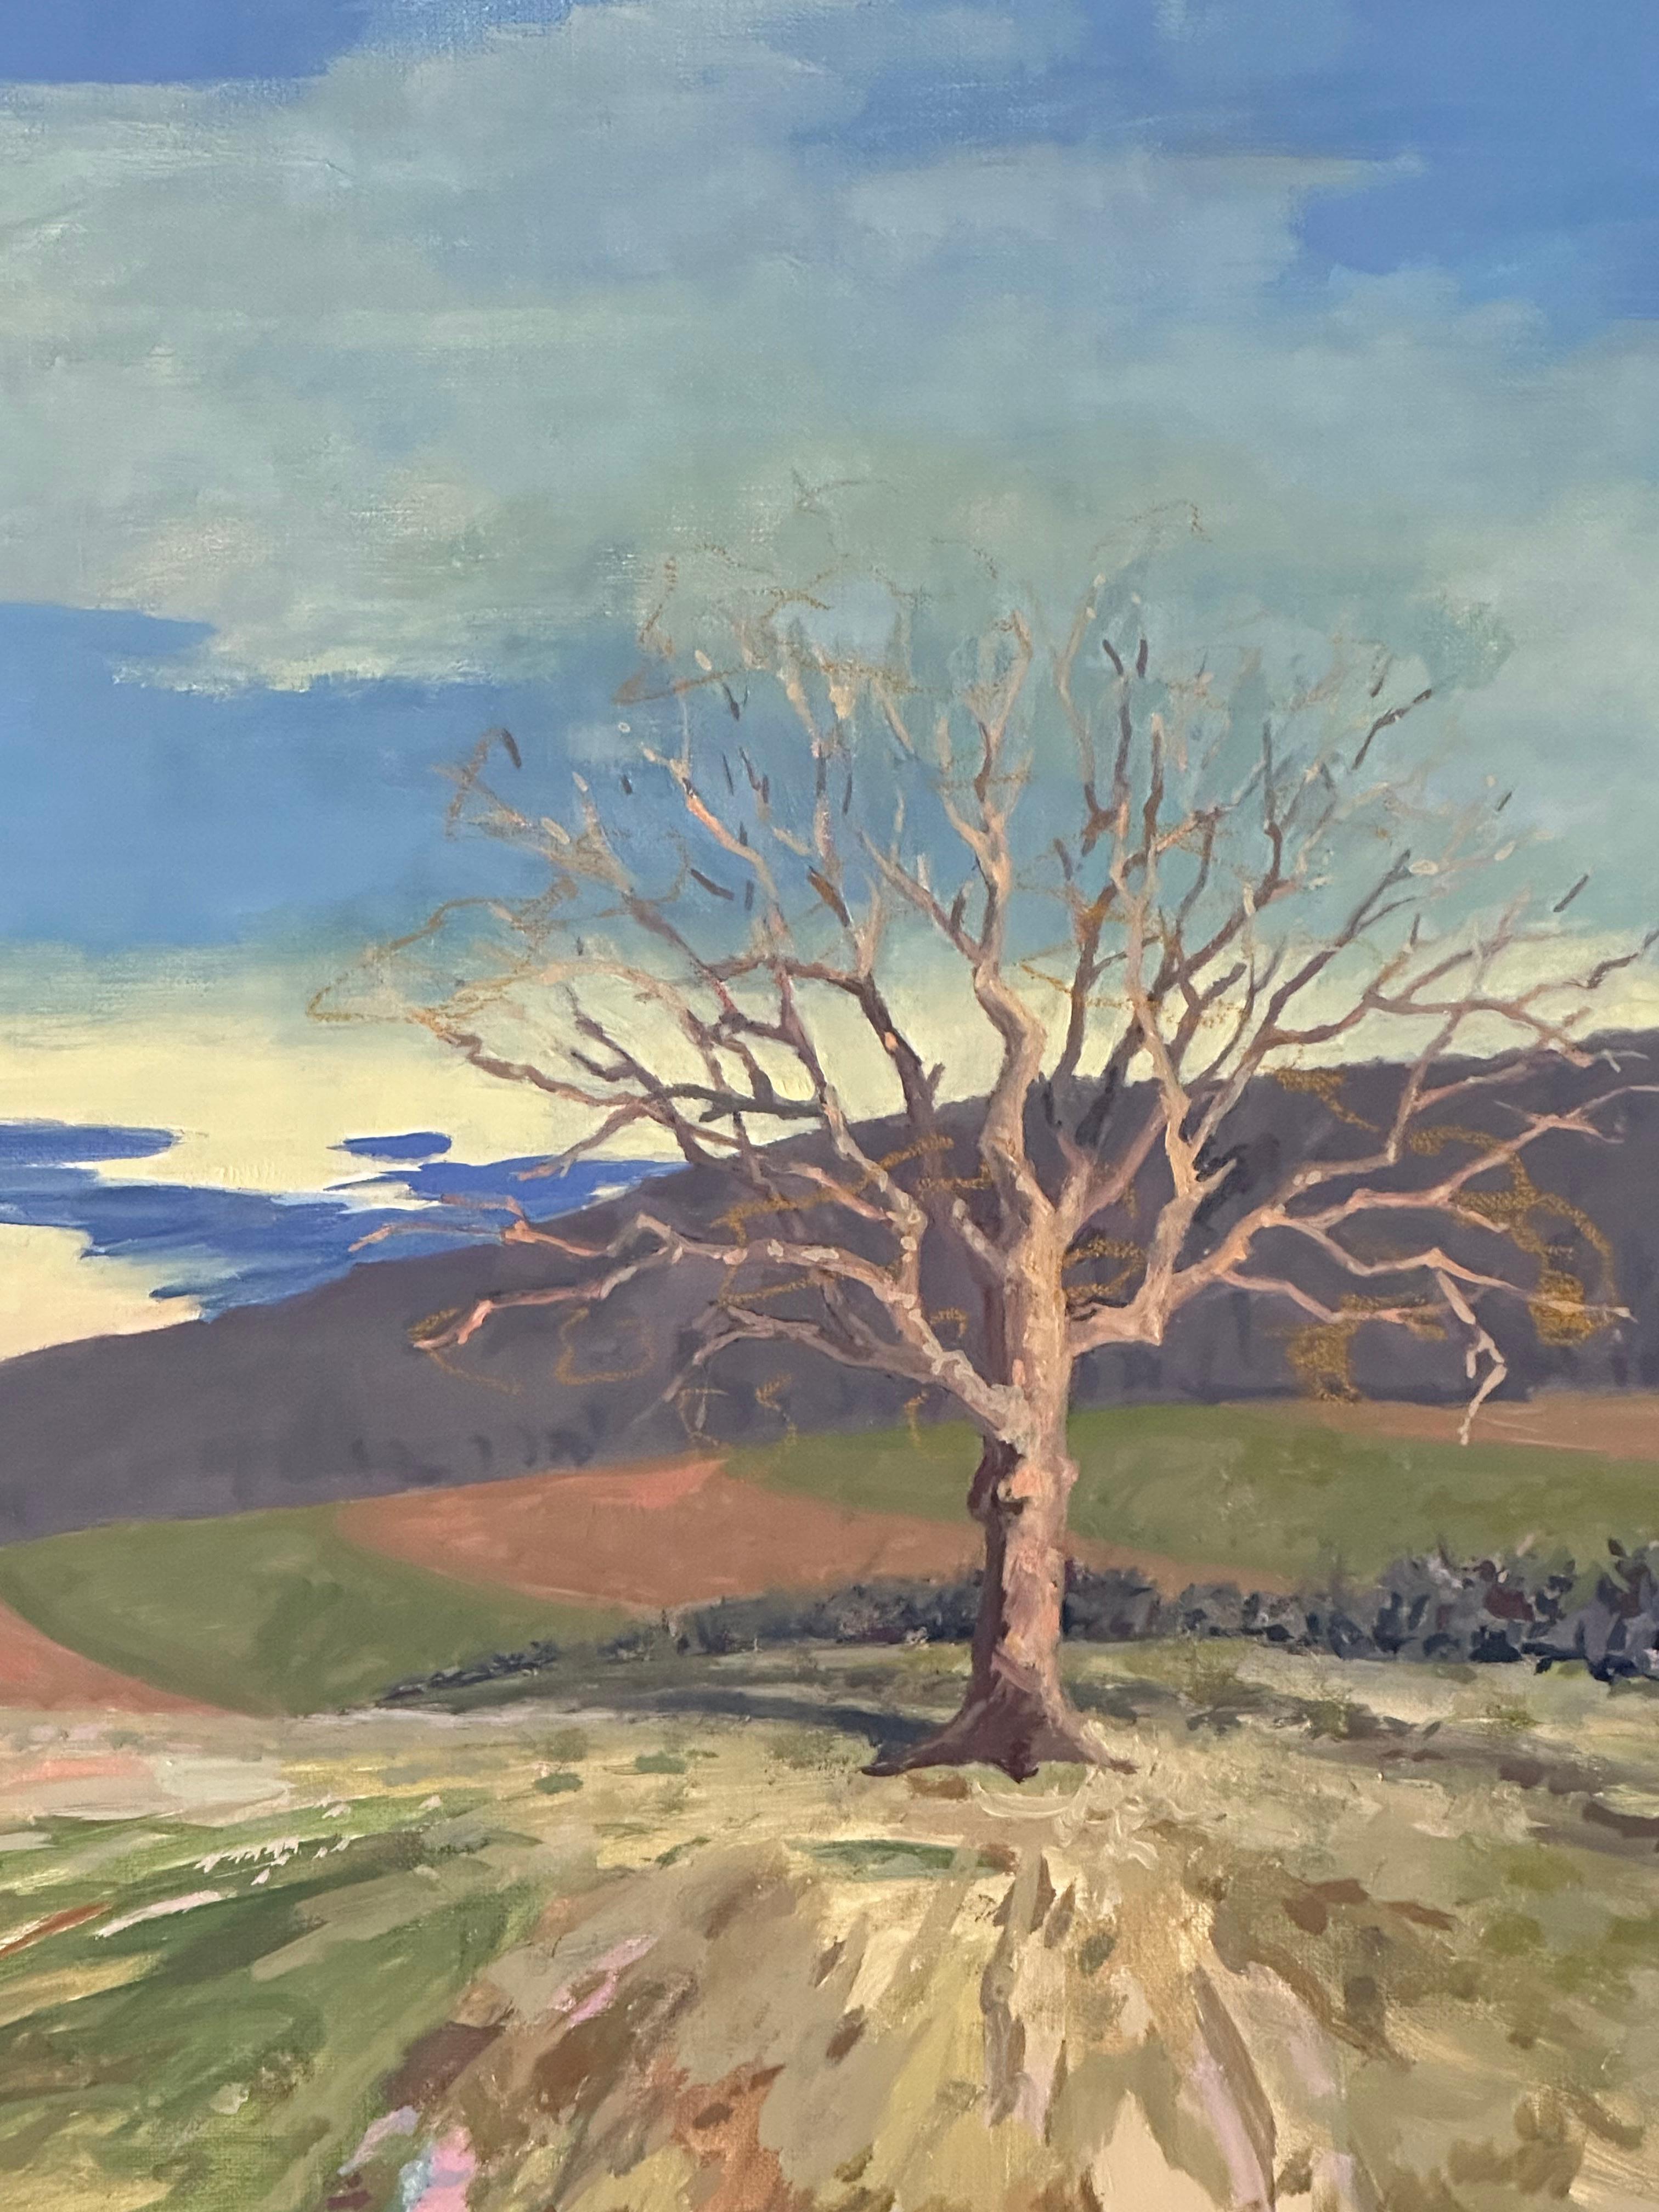 Soft clouds float in a pale blue sky with hints of luminous pale yellow towards the horizon, over an idyllic rural landscape with rolling hills and a single tree, barren of leaves in early spring. Signed, dated and titled on verso.

KK Kozik is a